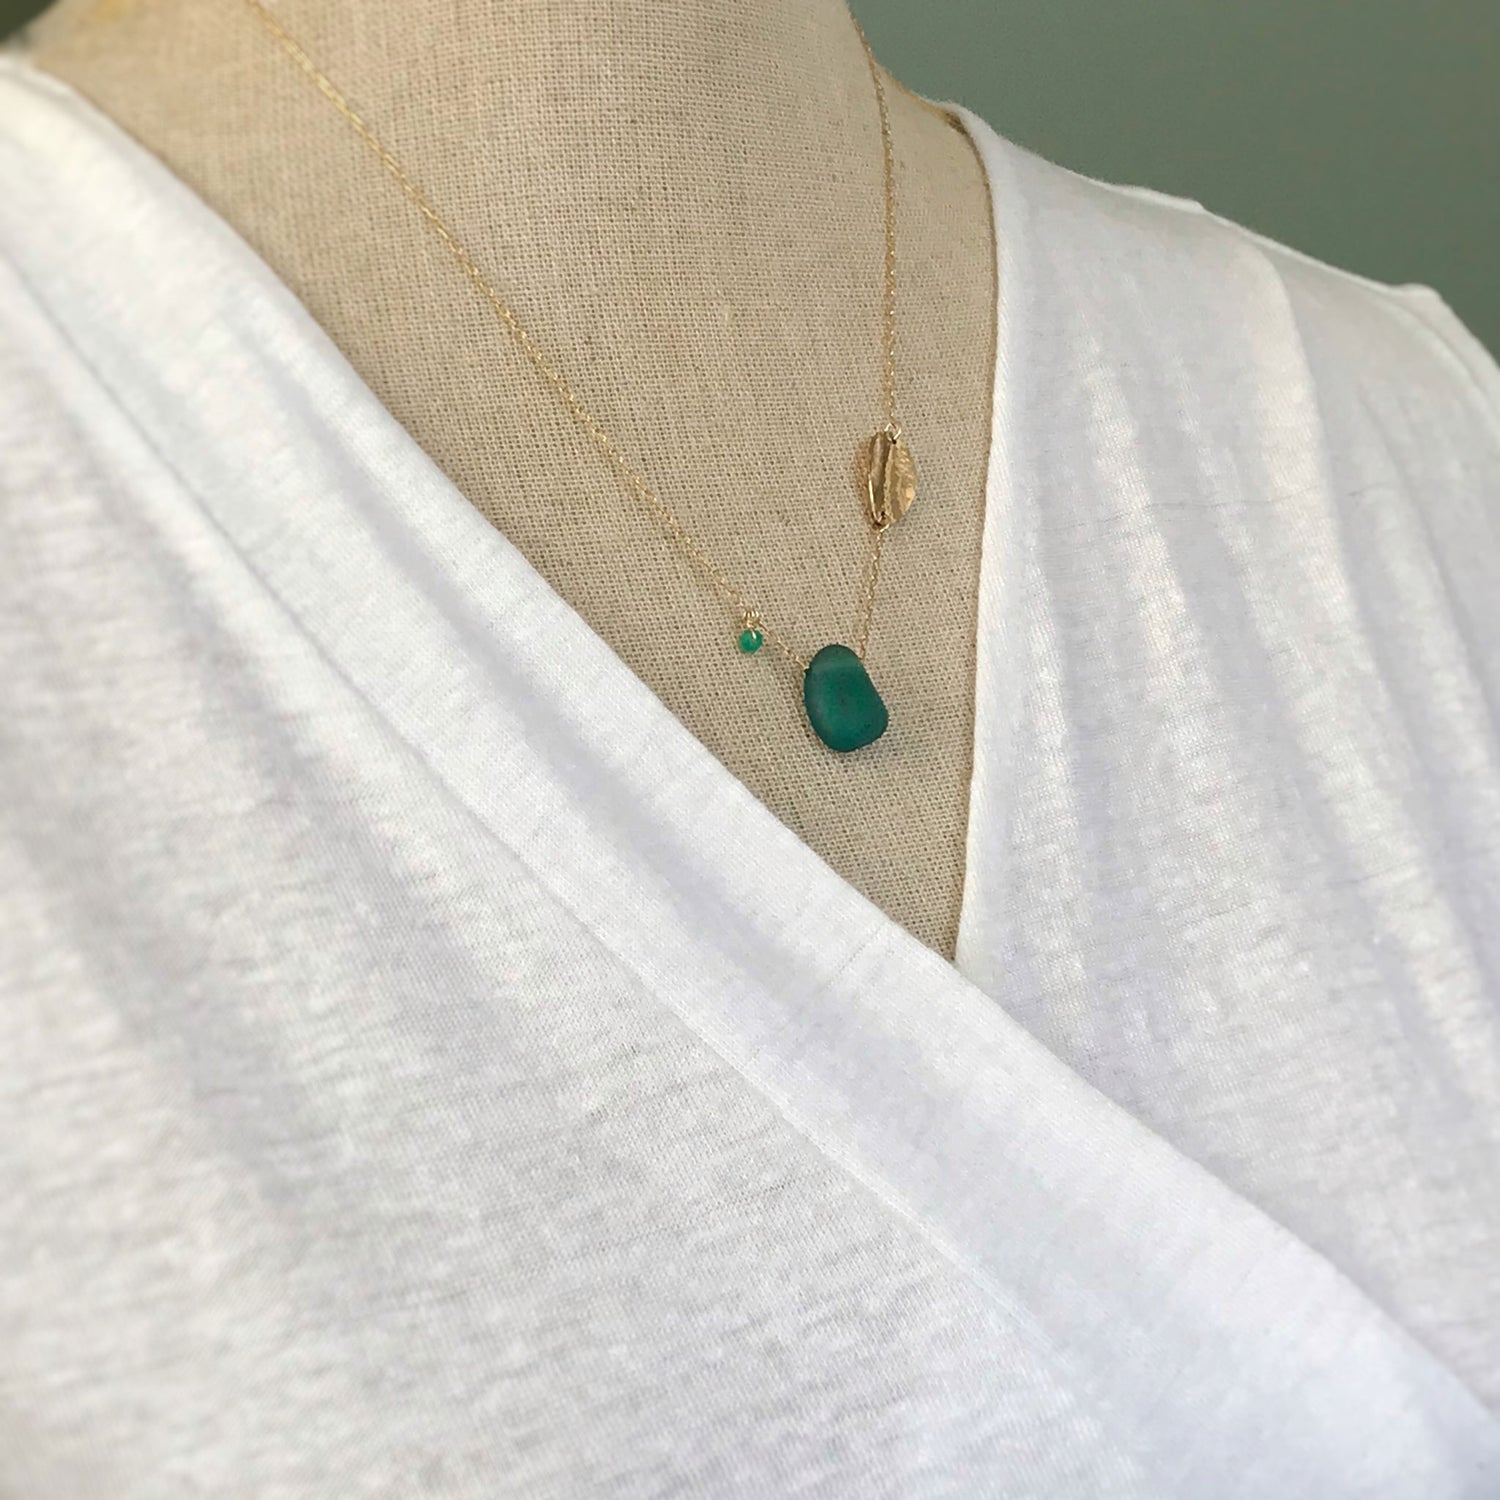 Teal Sea Glass Gold Necklace with Gold Leaf Charm